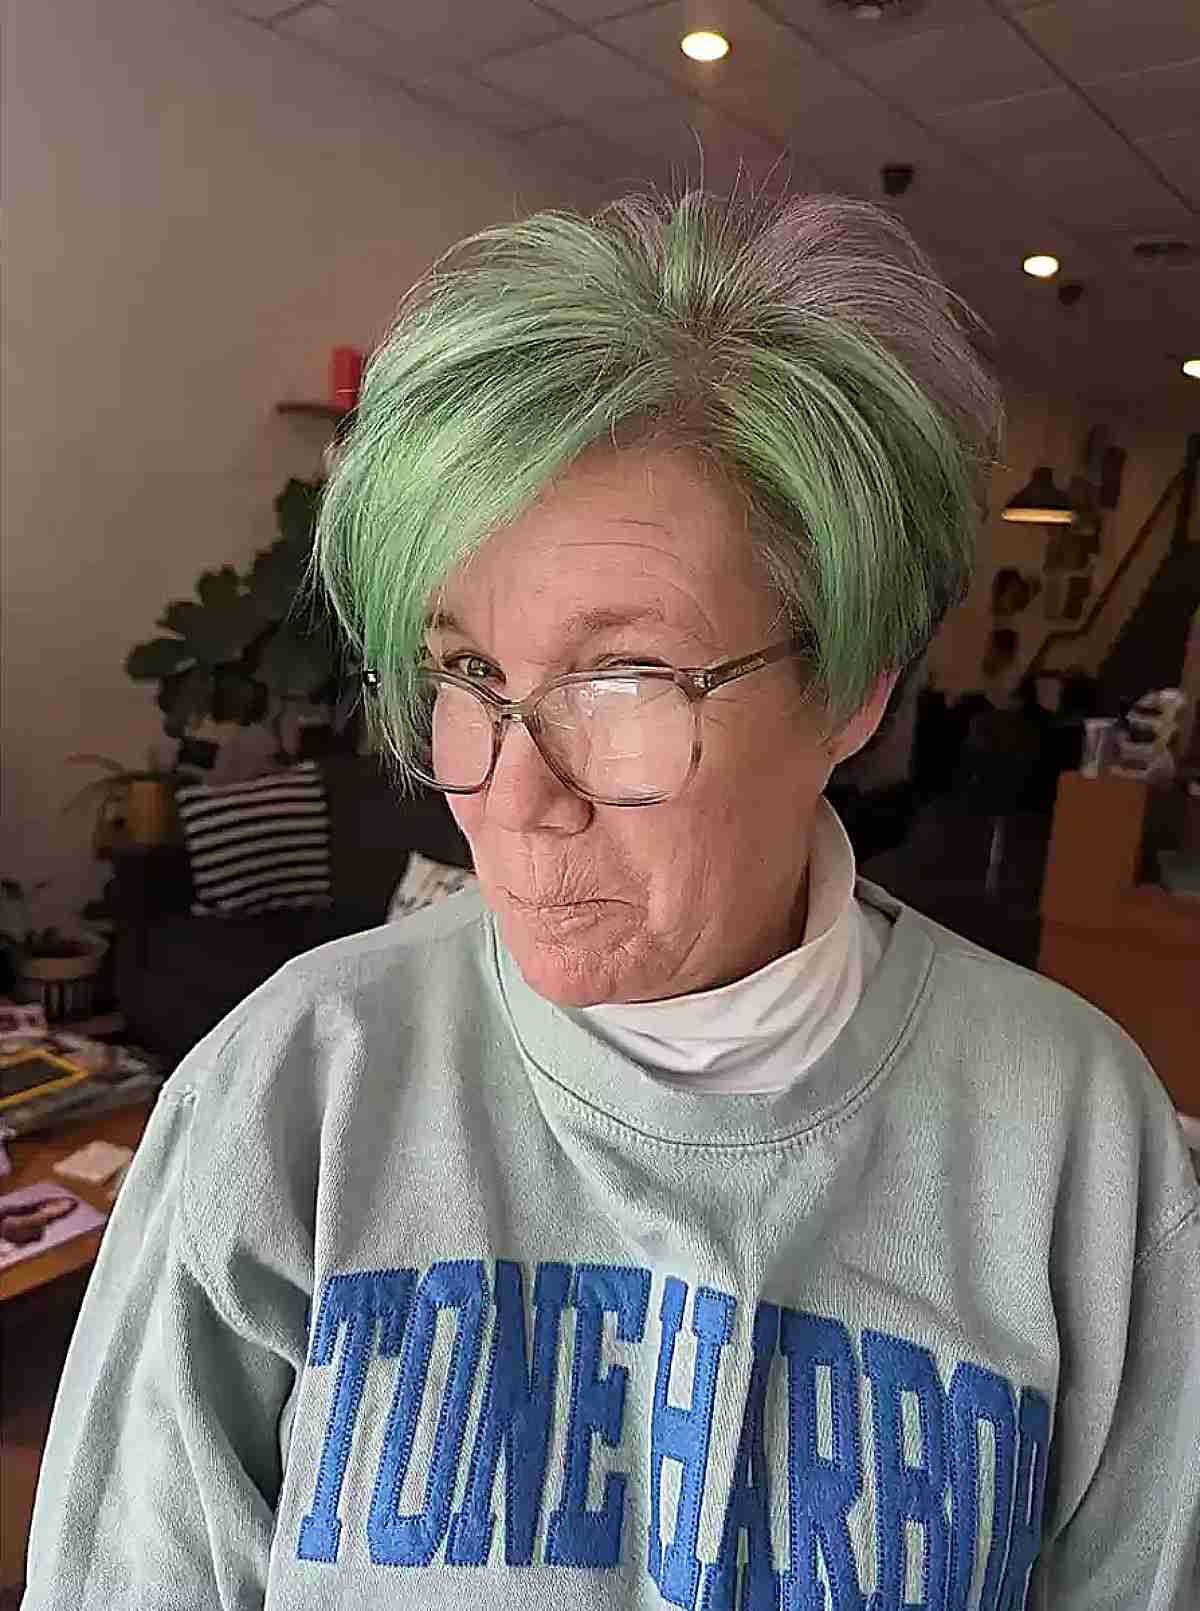 Pixie with Green Highlights and Long Side Bangs for Ladies Over 50 with Glasses